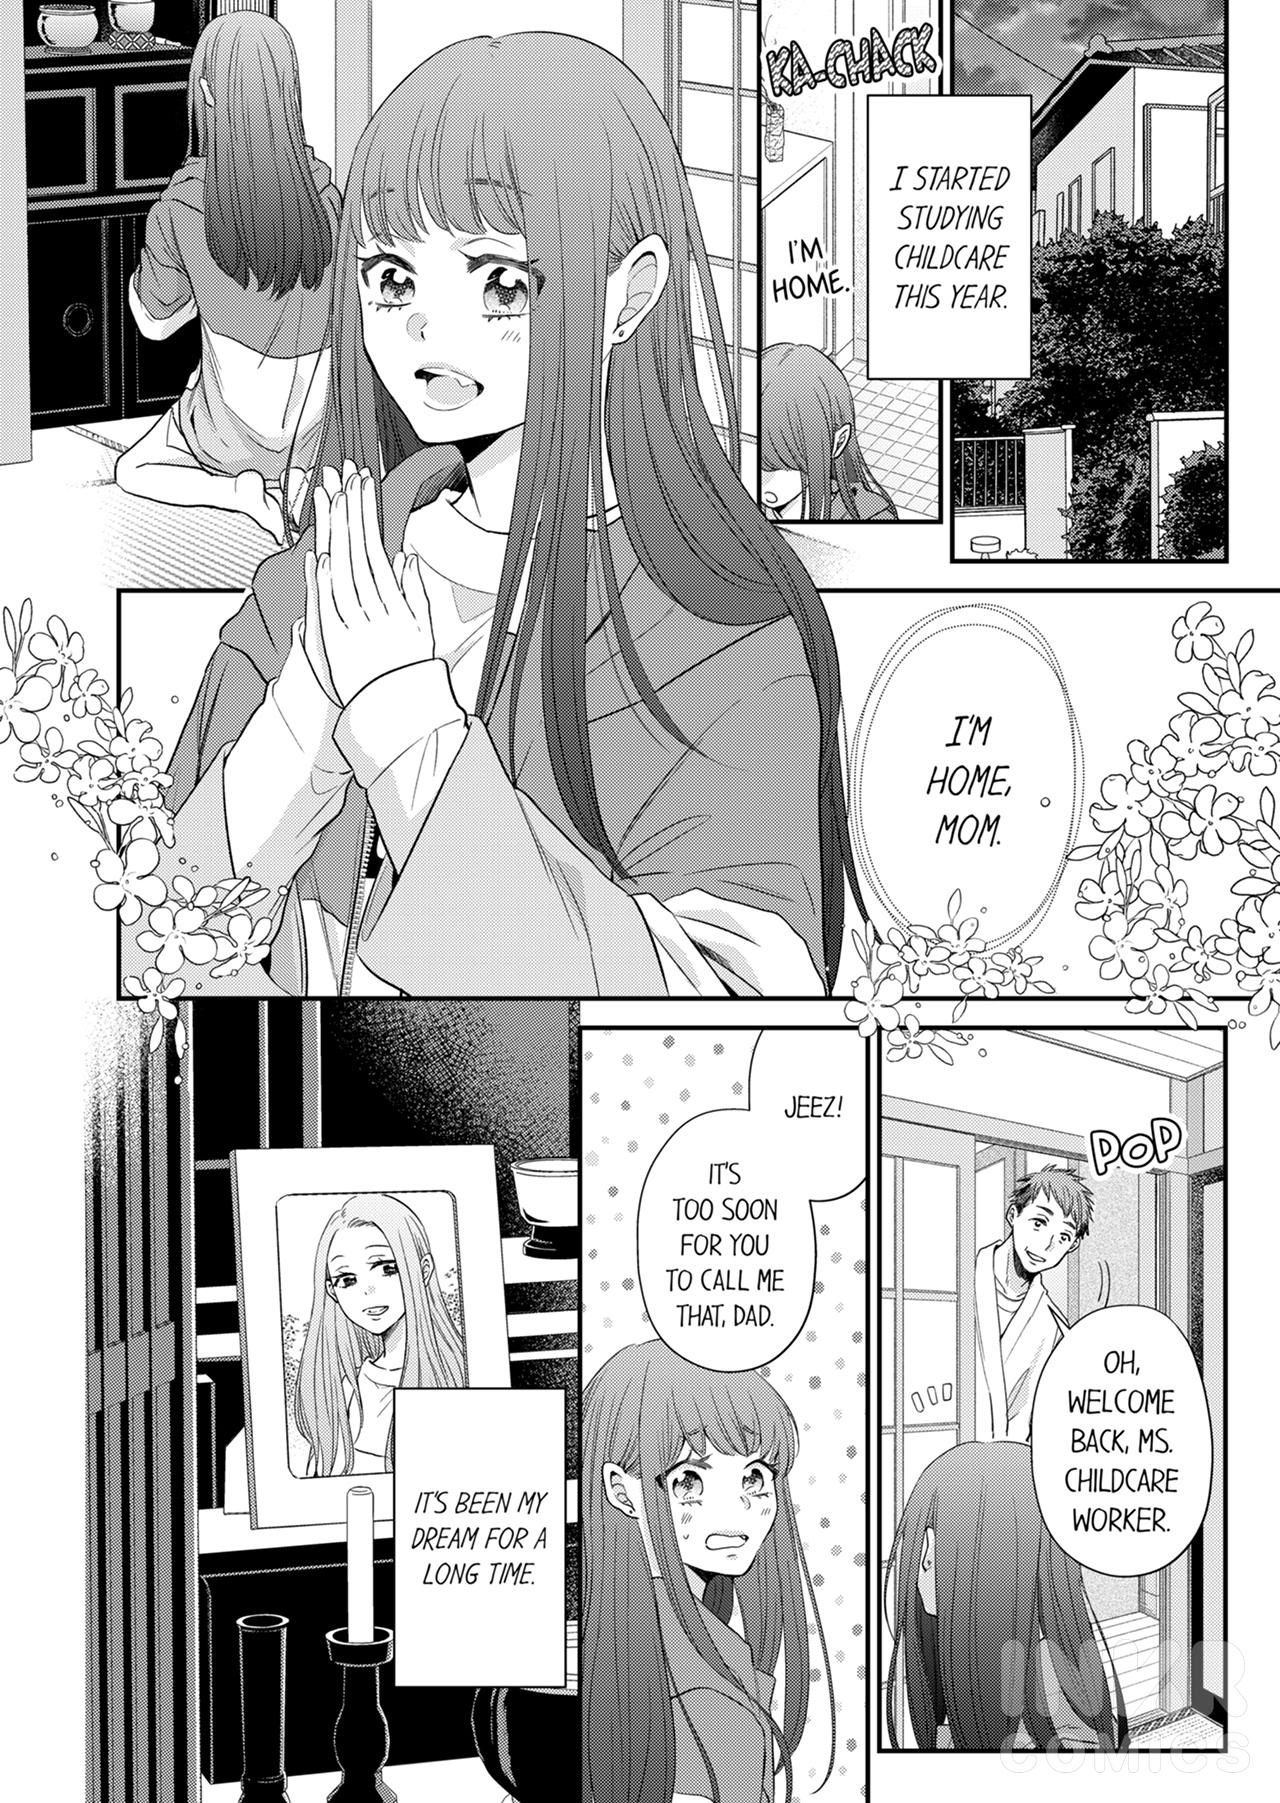 I Met My Childhood Friend Again And… He’S A Man Now!? Doting Sex That Makes Me Impatient - Page 2